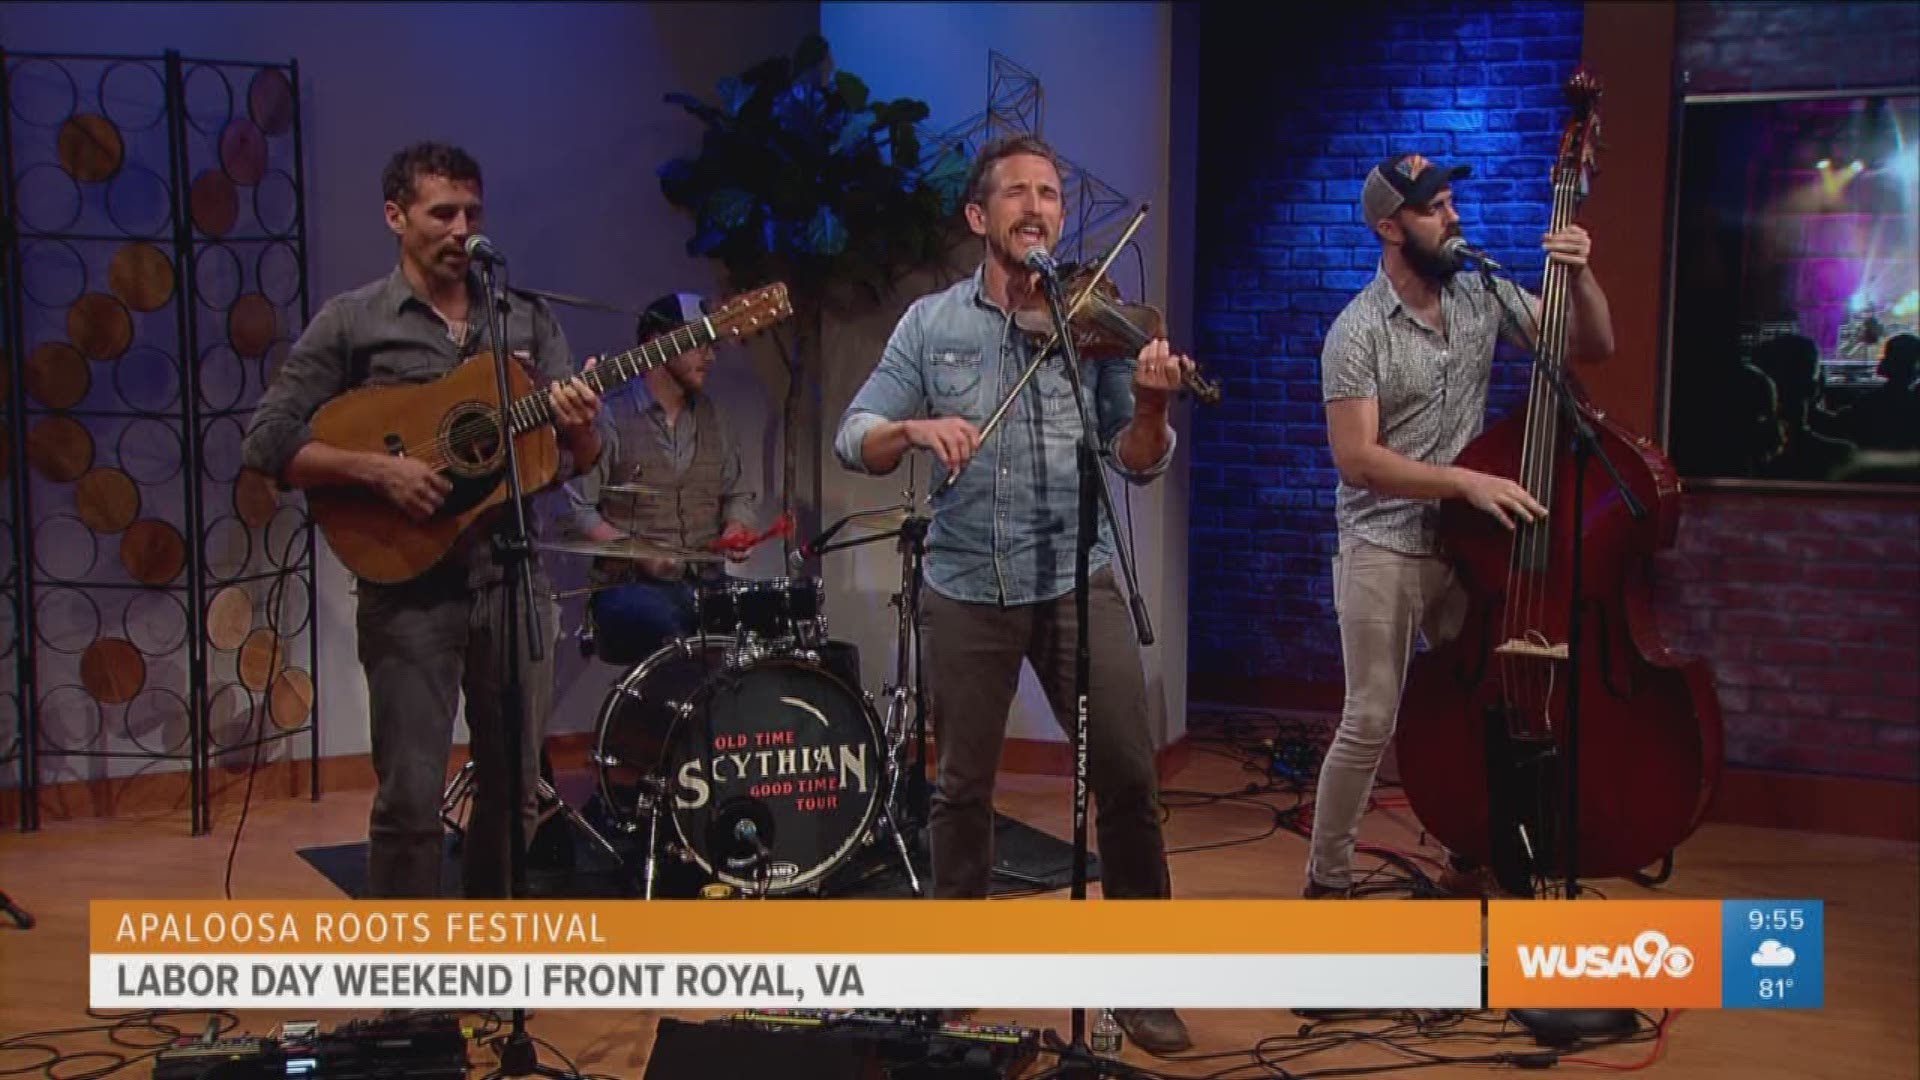 Scythian band performs their hit song 'Galway City' on Great Day Washington. To see Scythian live, they will be performing at the Appaloosa Roots Music Festival Aug. 30-Sept. 1, 2019 at the Skyline Ranch Resort in Front Royal, VA. To purchase tickets, go to appaloosafestival.com and use the code WUSA for a 20% off discount.